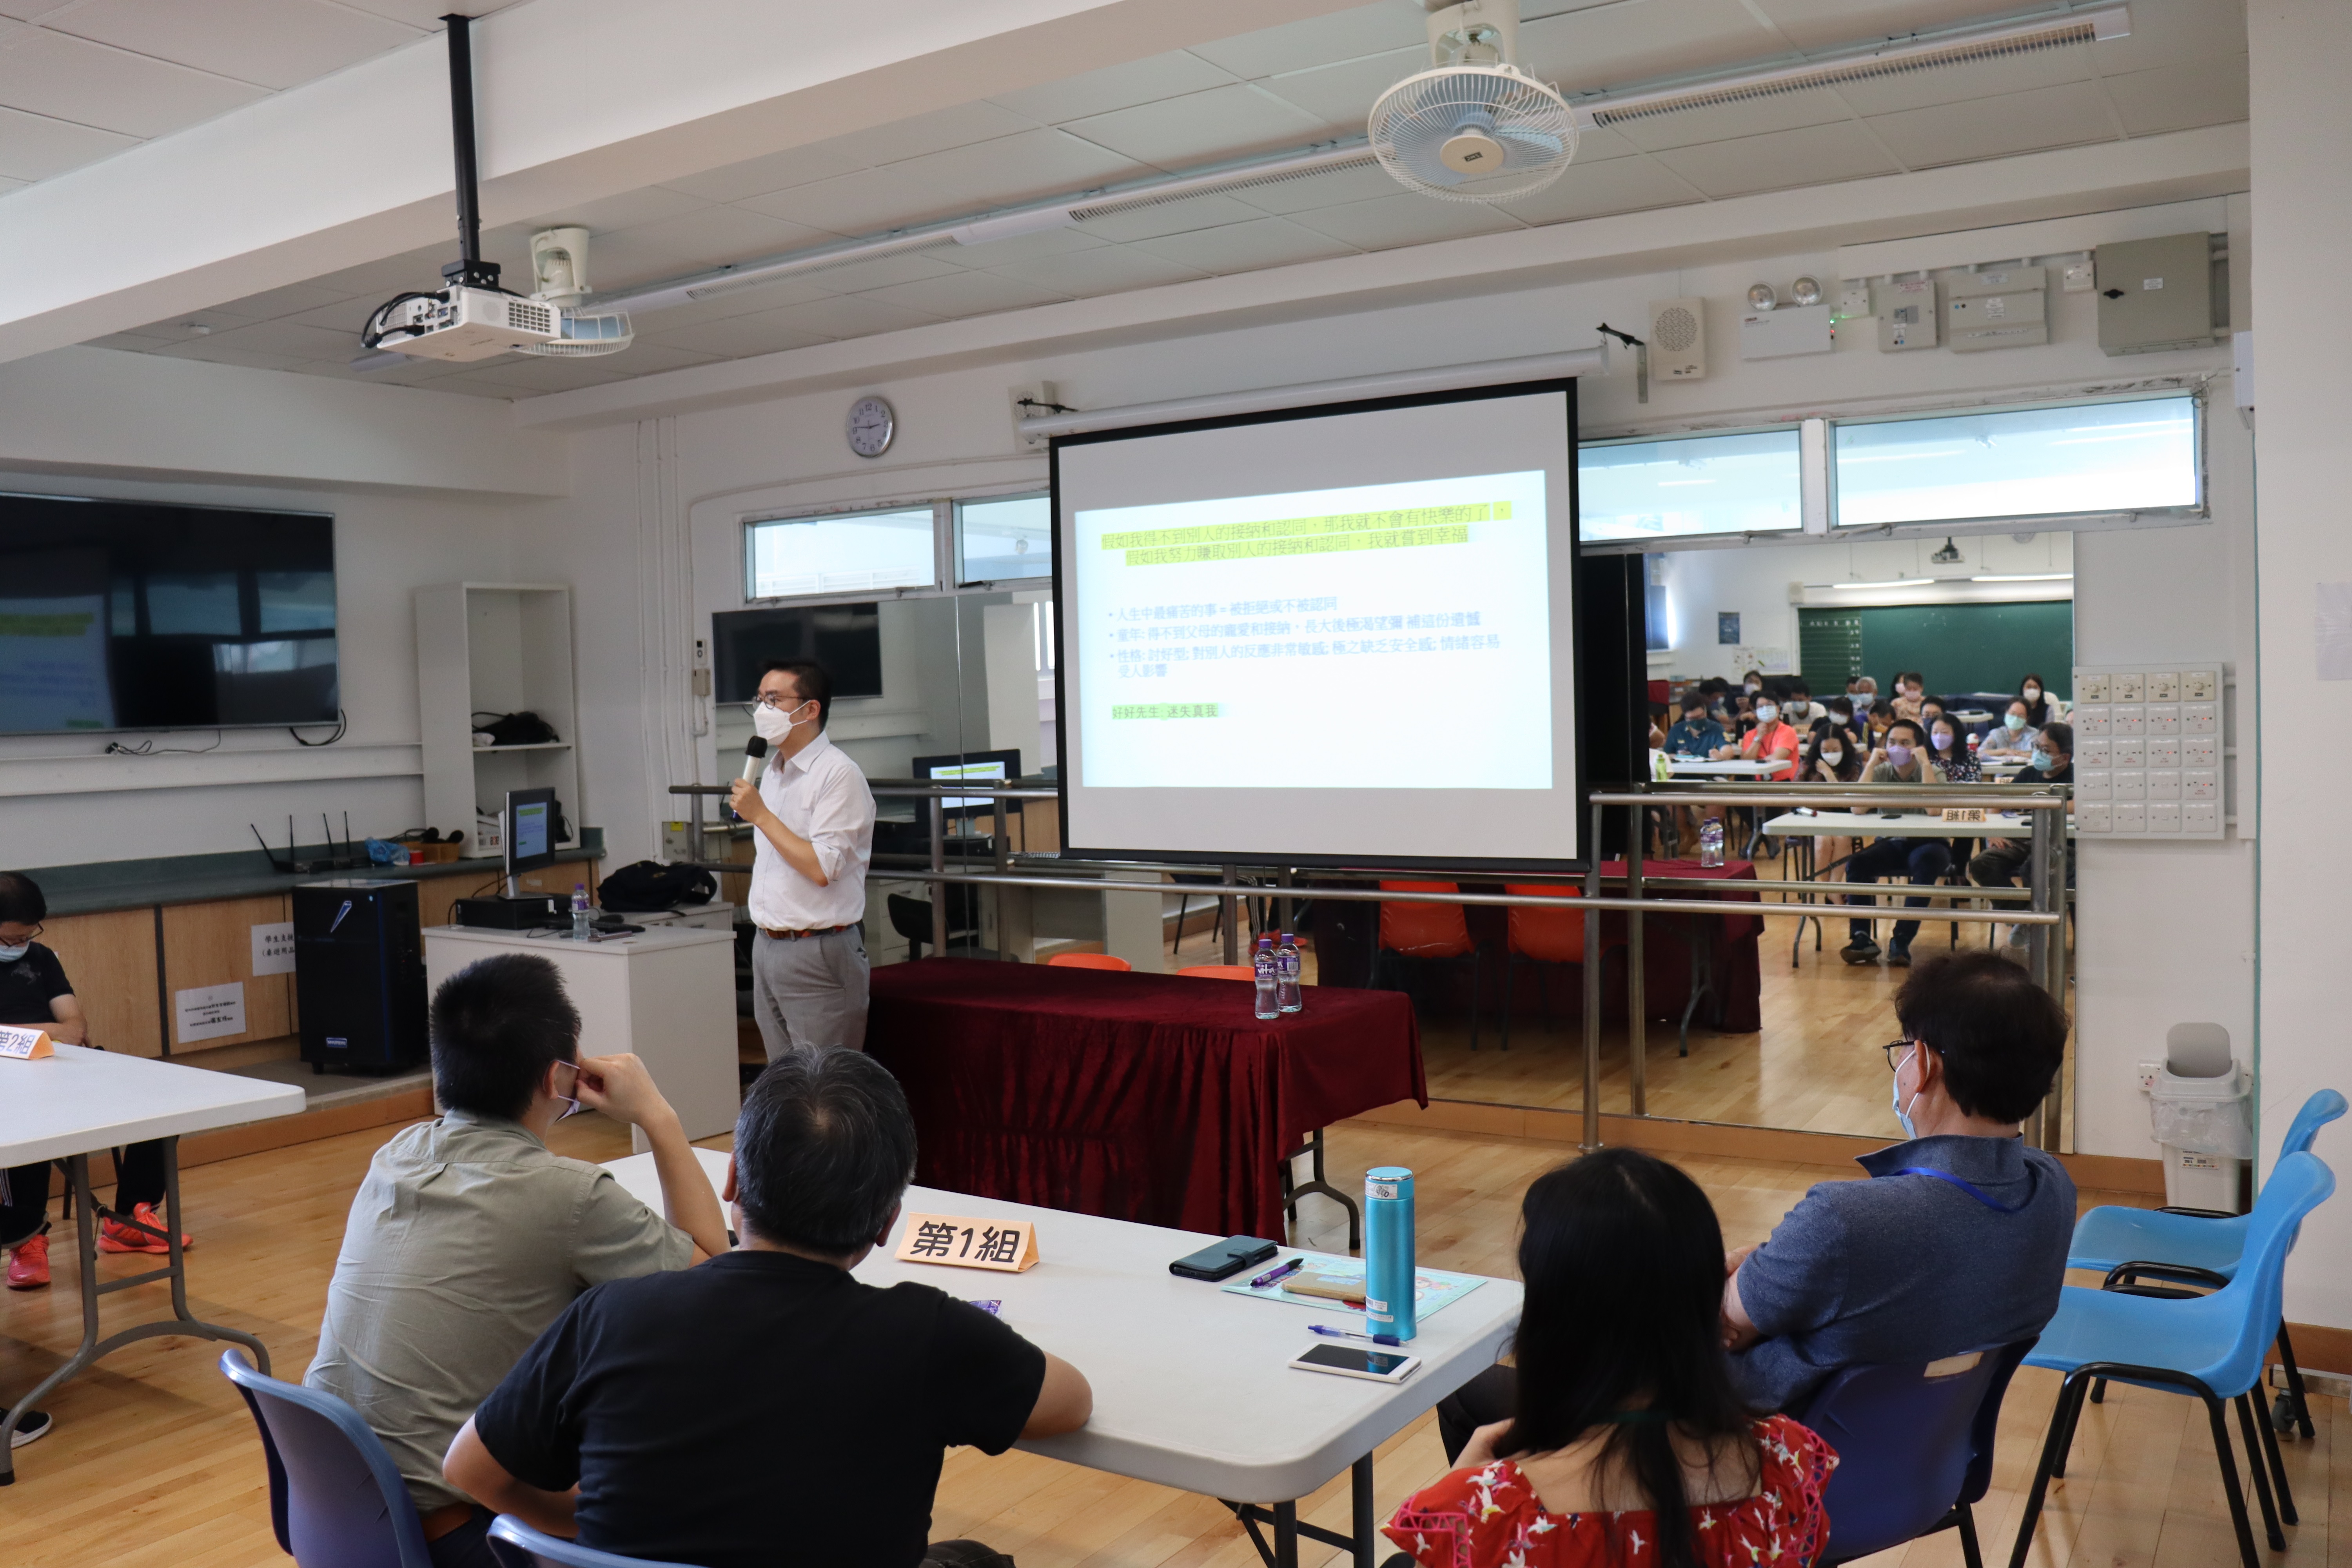 The Fourth Session by Dr. Chu-Trainer Counseling Skills Programme at Hing Tak Primary School